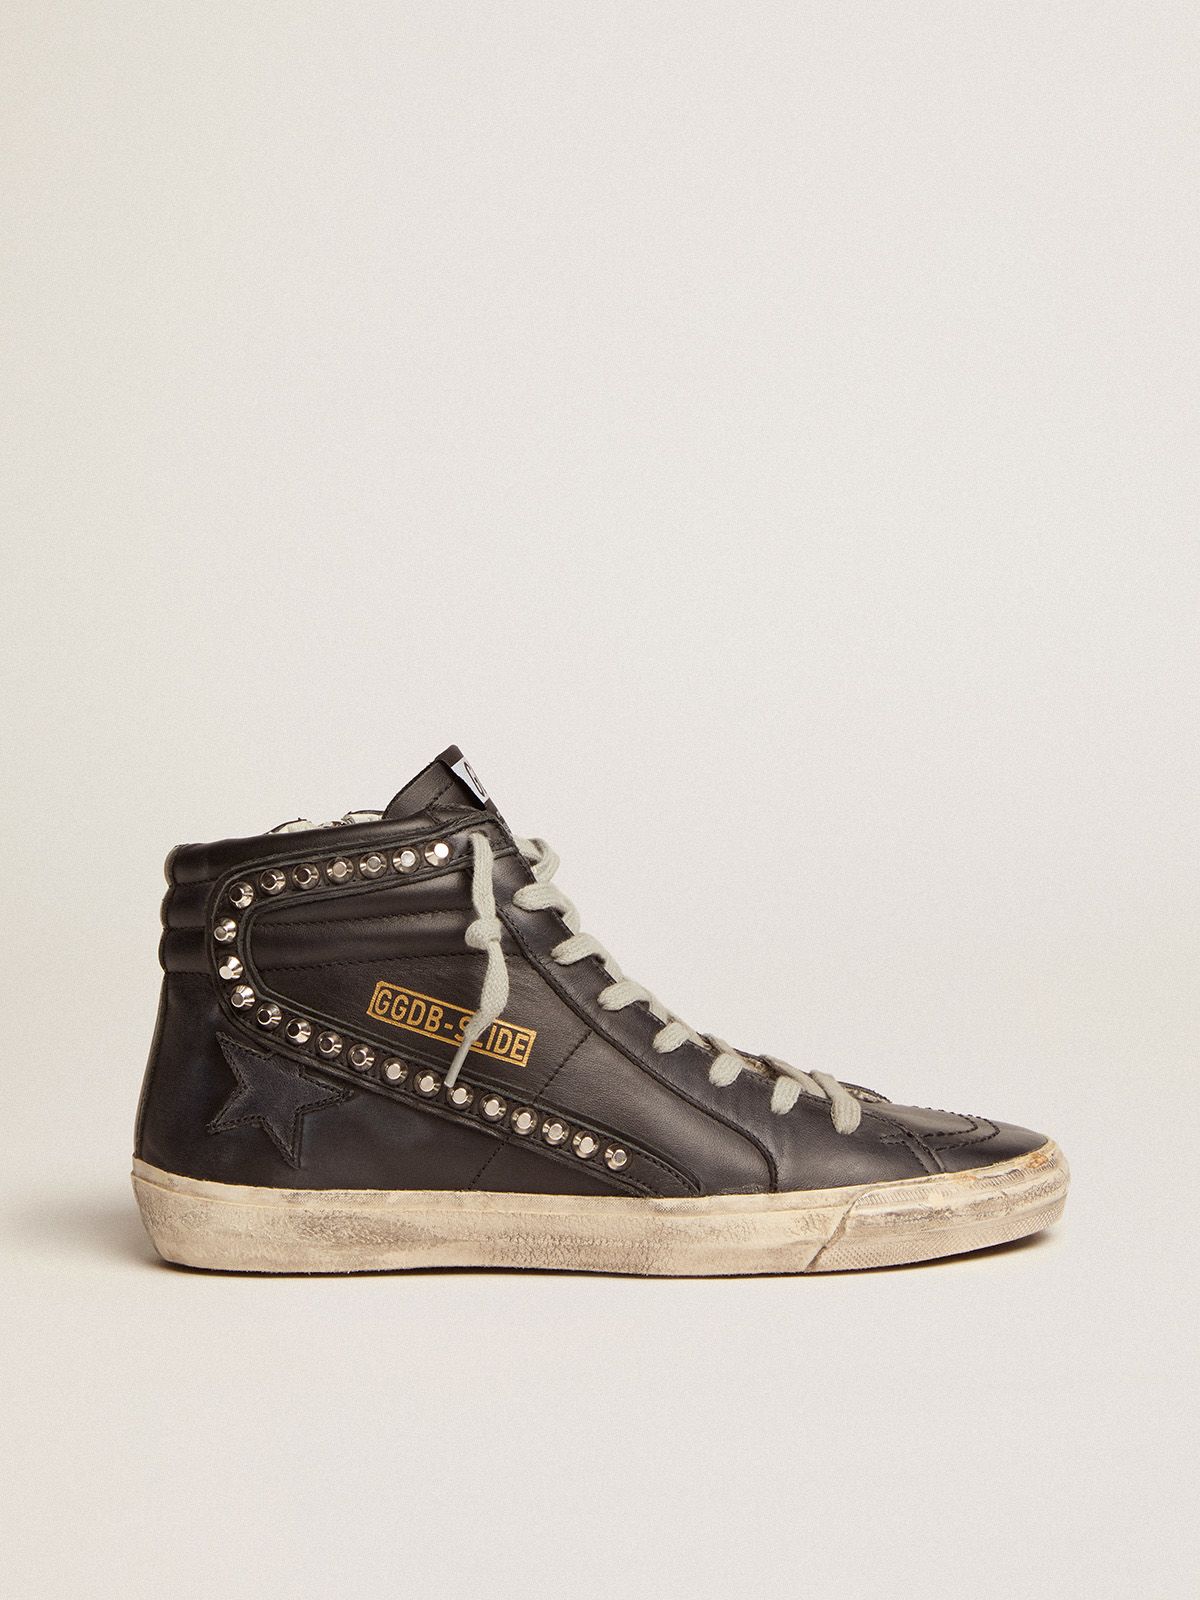 golden goose sneakers leather Slide in metal studded